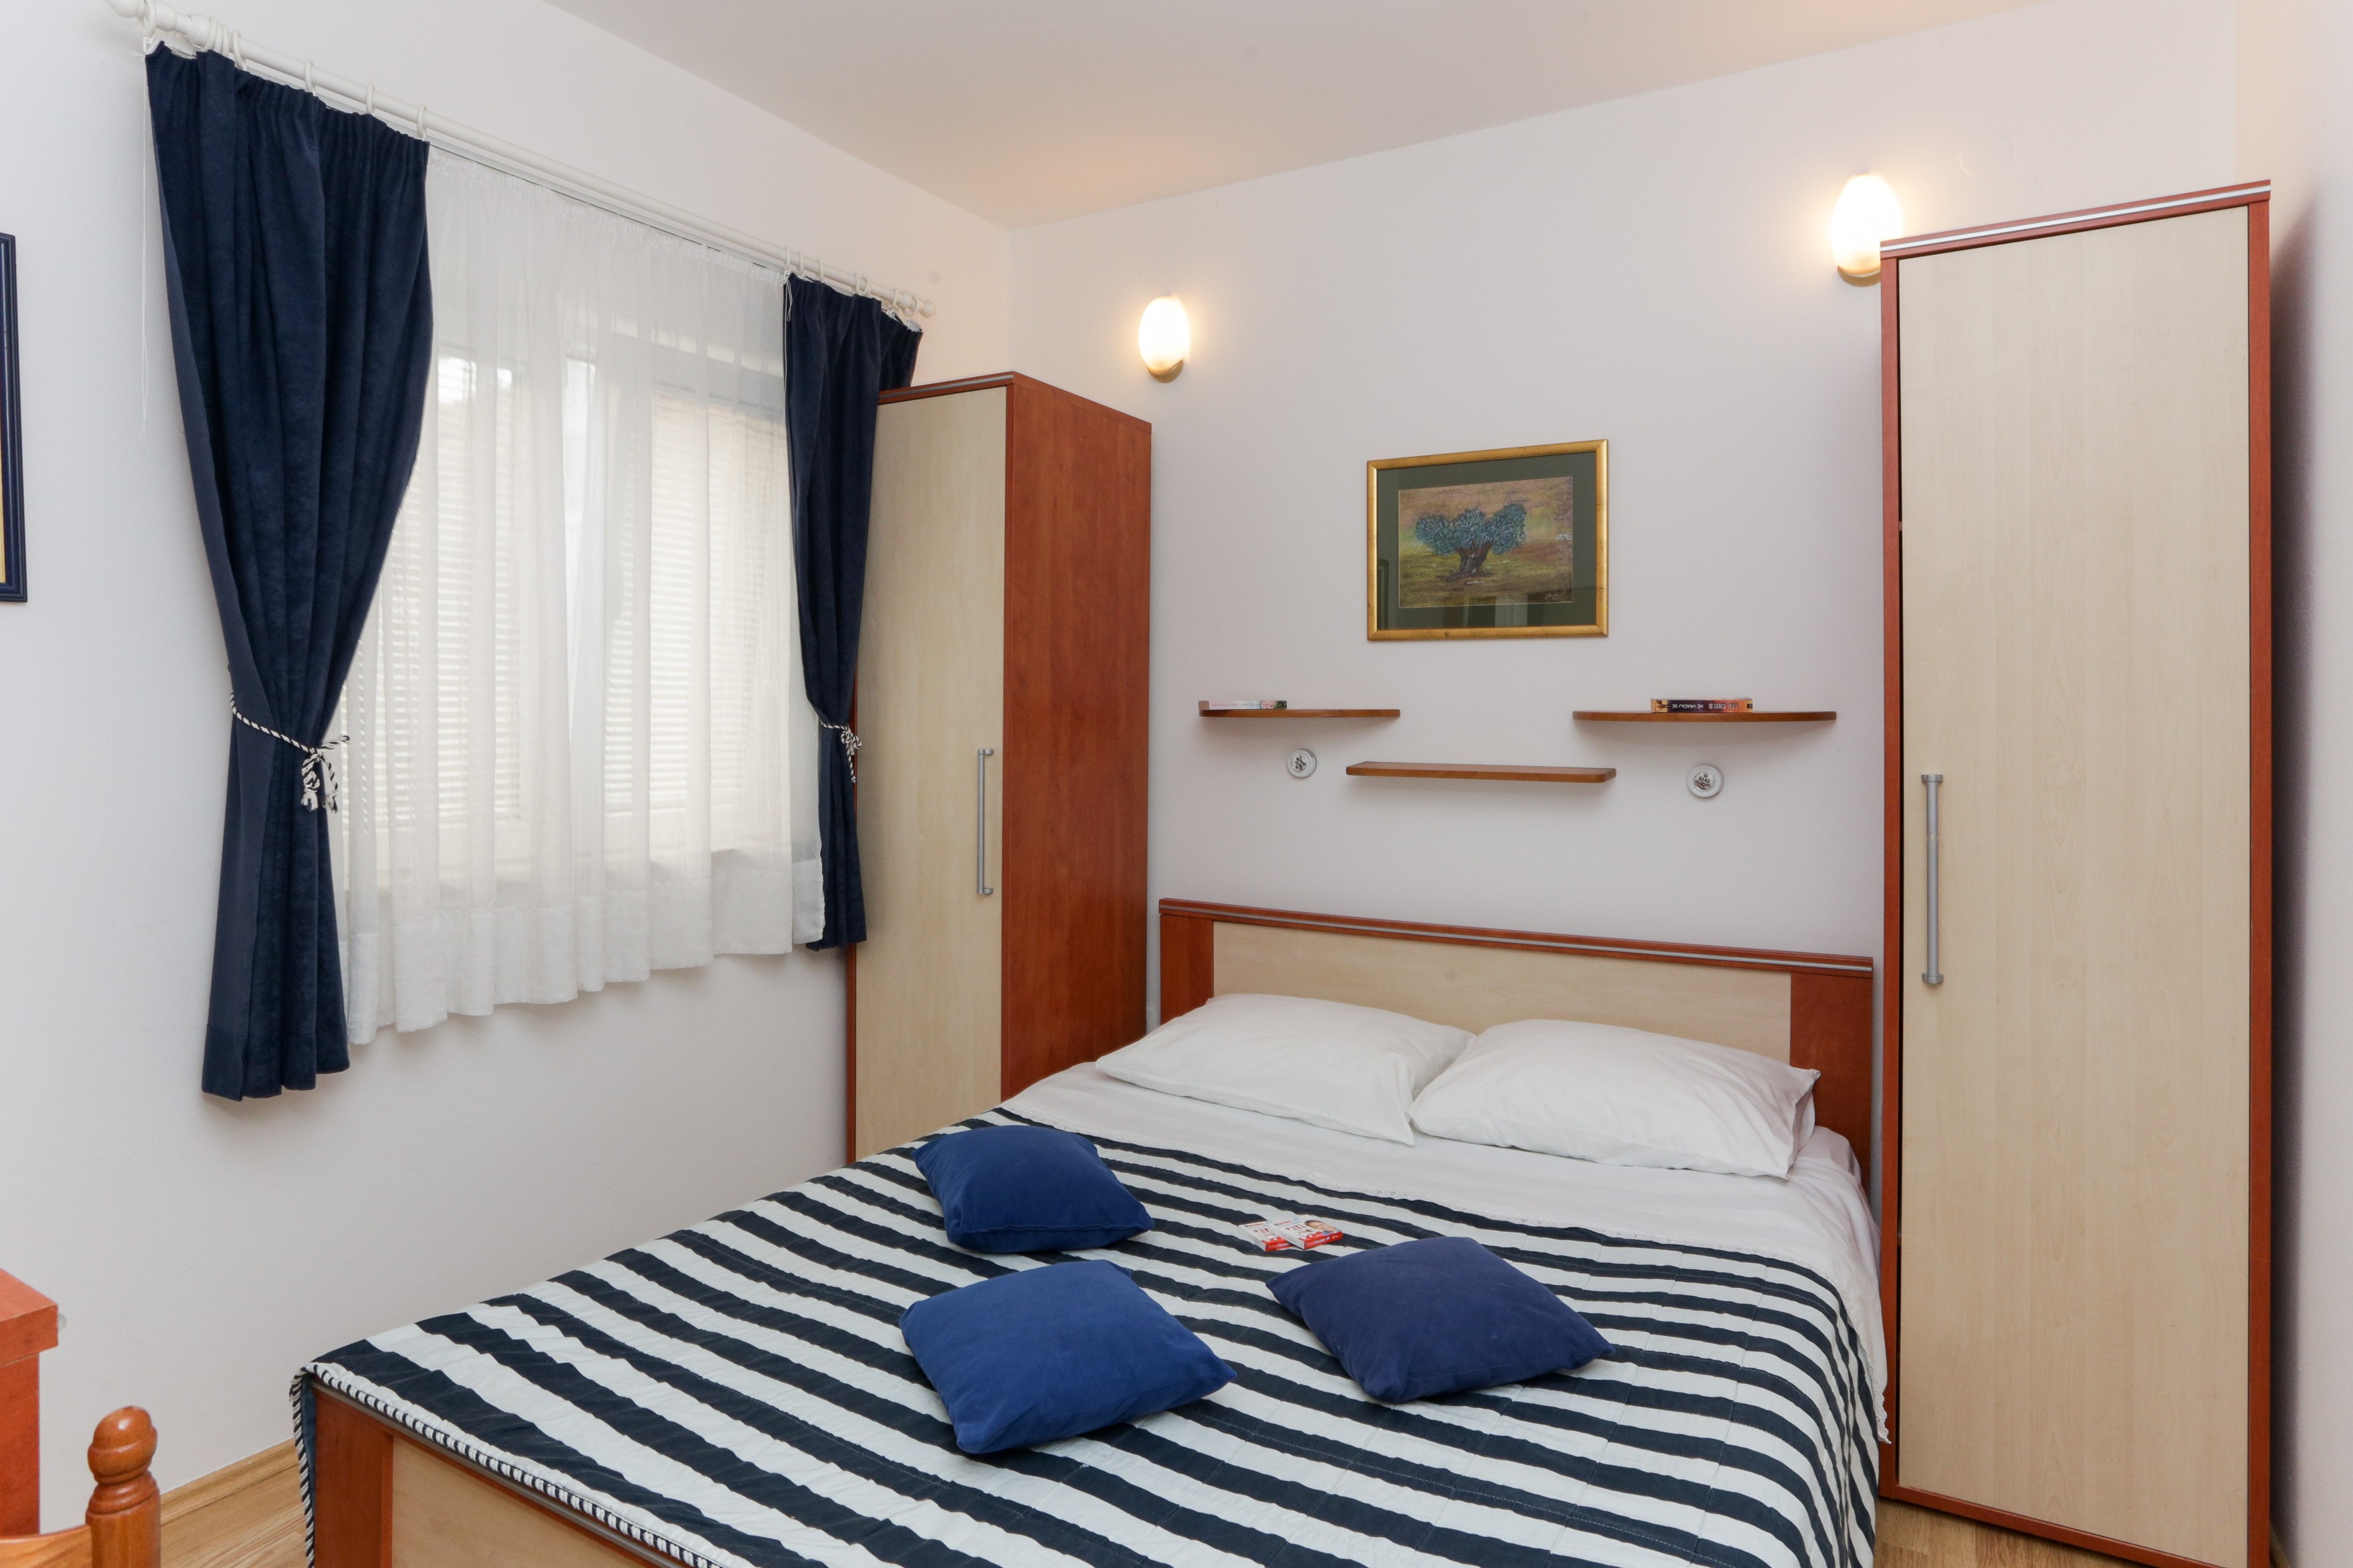 K-Apartments - Two Bedroom Apartment with Terrace    Dubrovnik